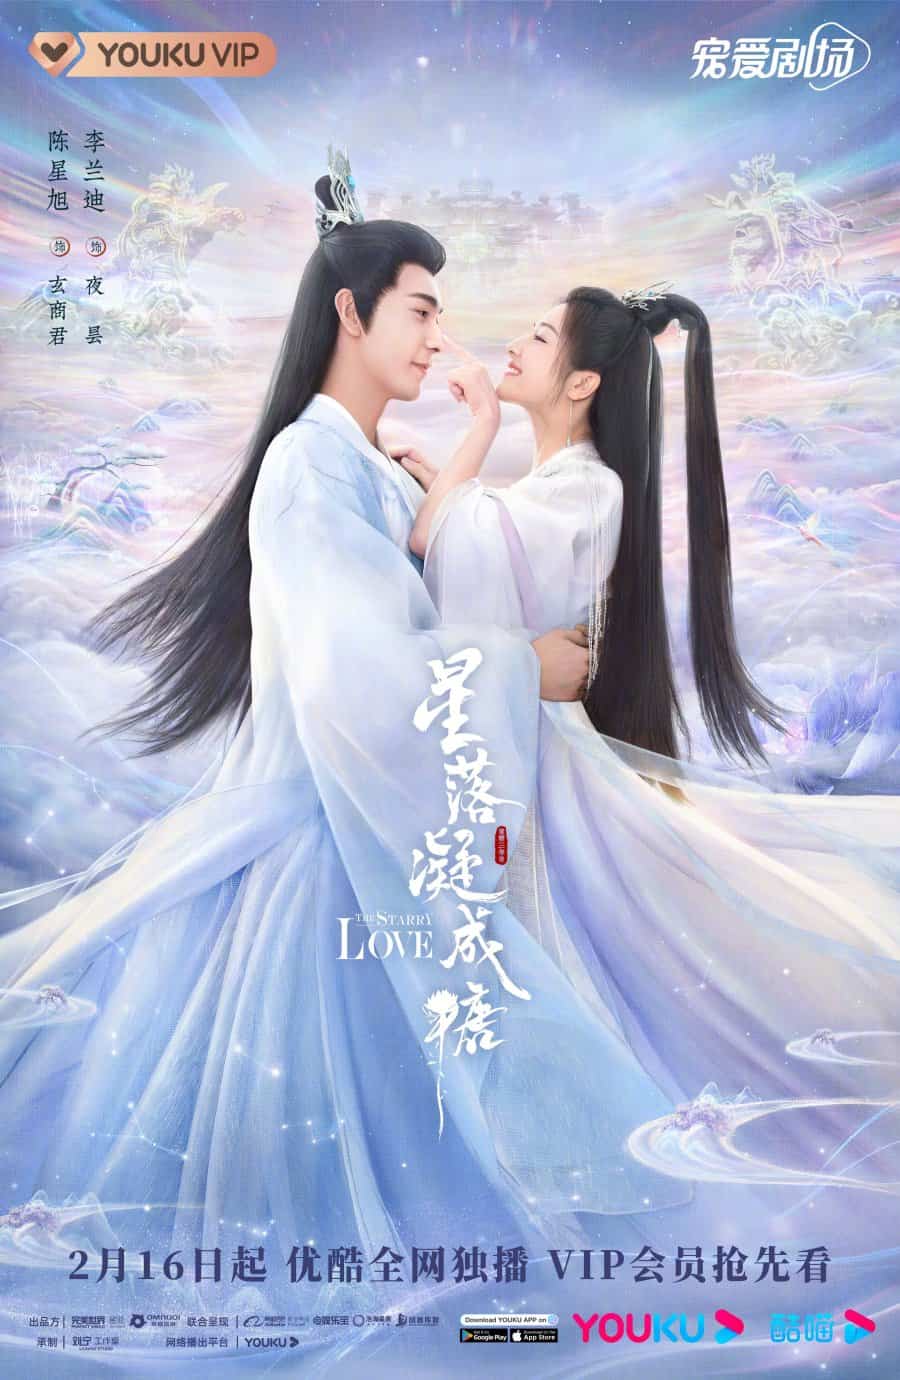 The Starry Love (Credits: Youku))